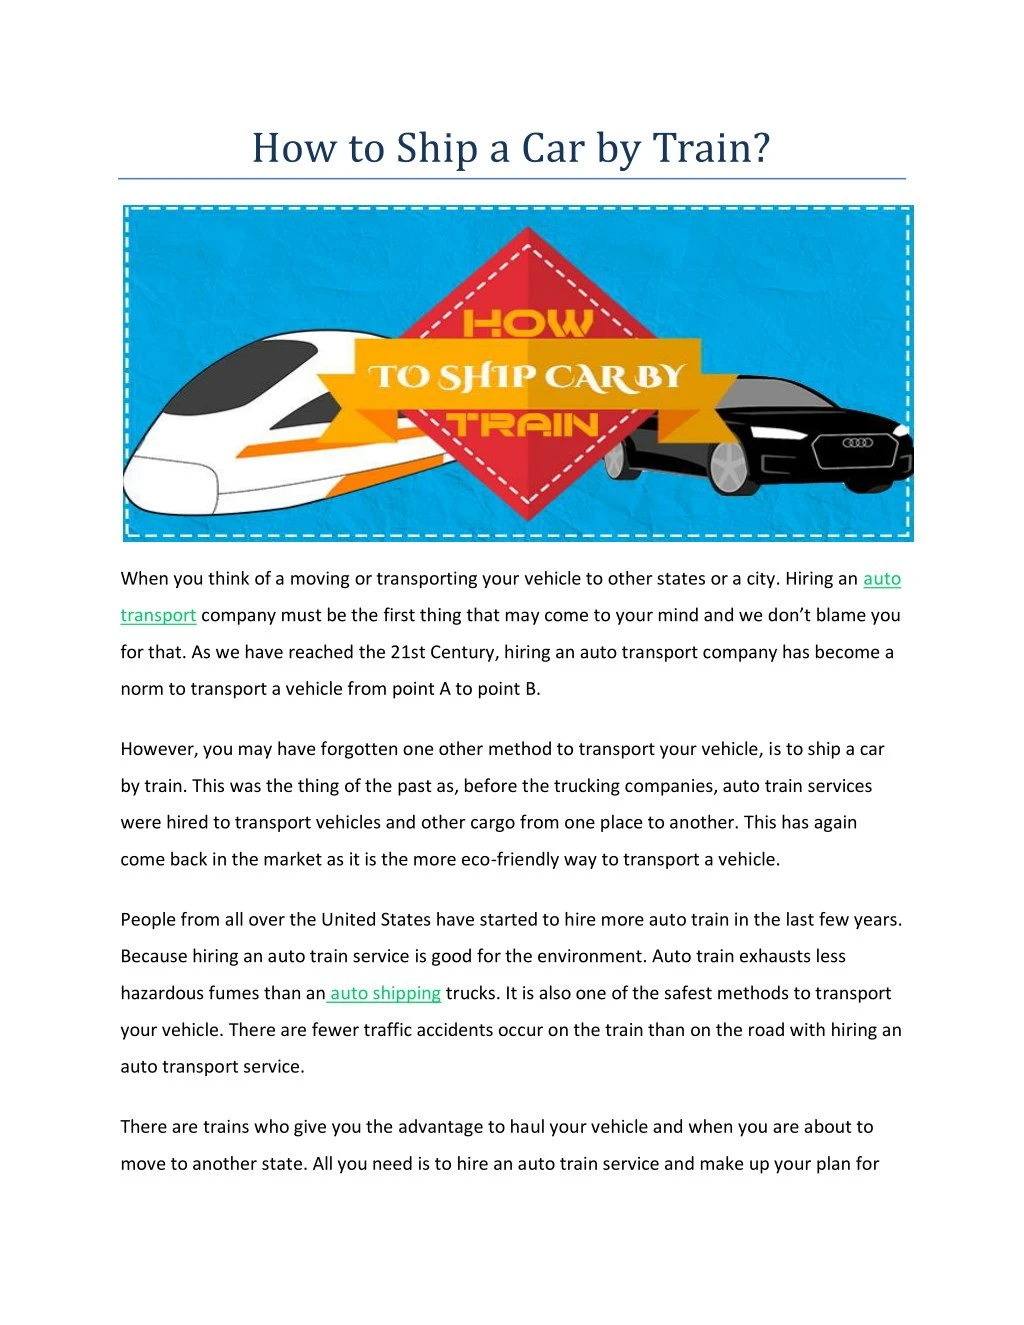 how to ship a car by train